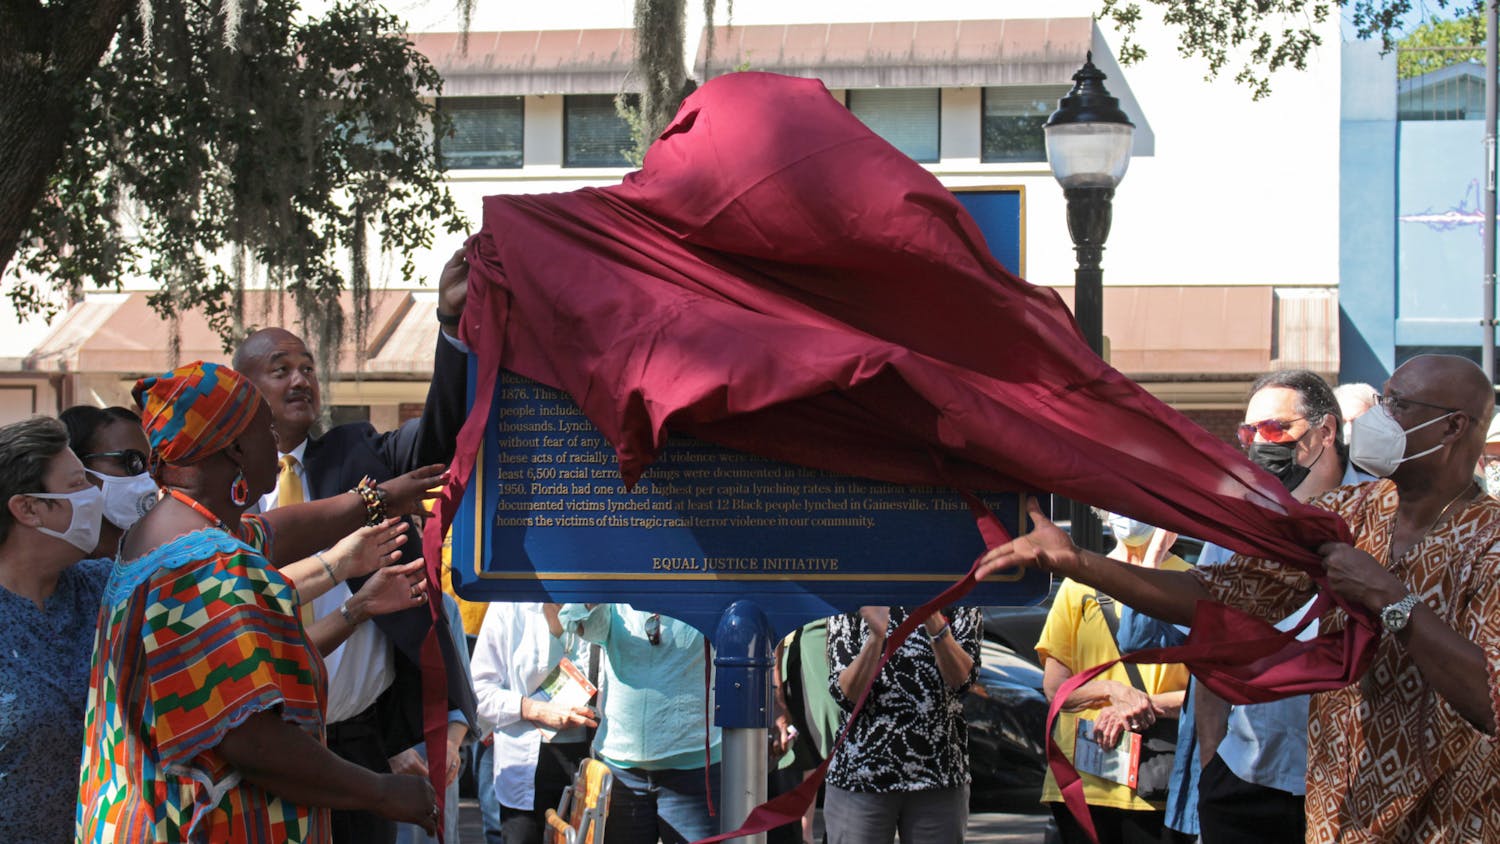 A historical marker is unveiled at the Alachua County Administration Building on Saturday, Oct. 23, 2021. The marker commemorates victims of lynching and says that at least 12 Black people were lynched in Gainesville.